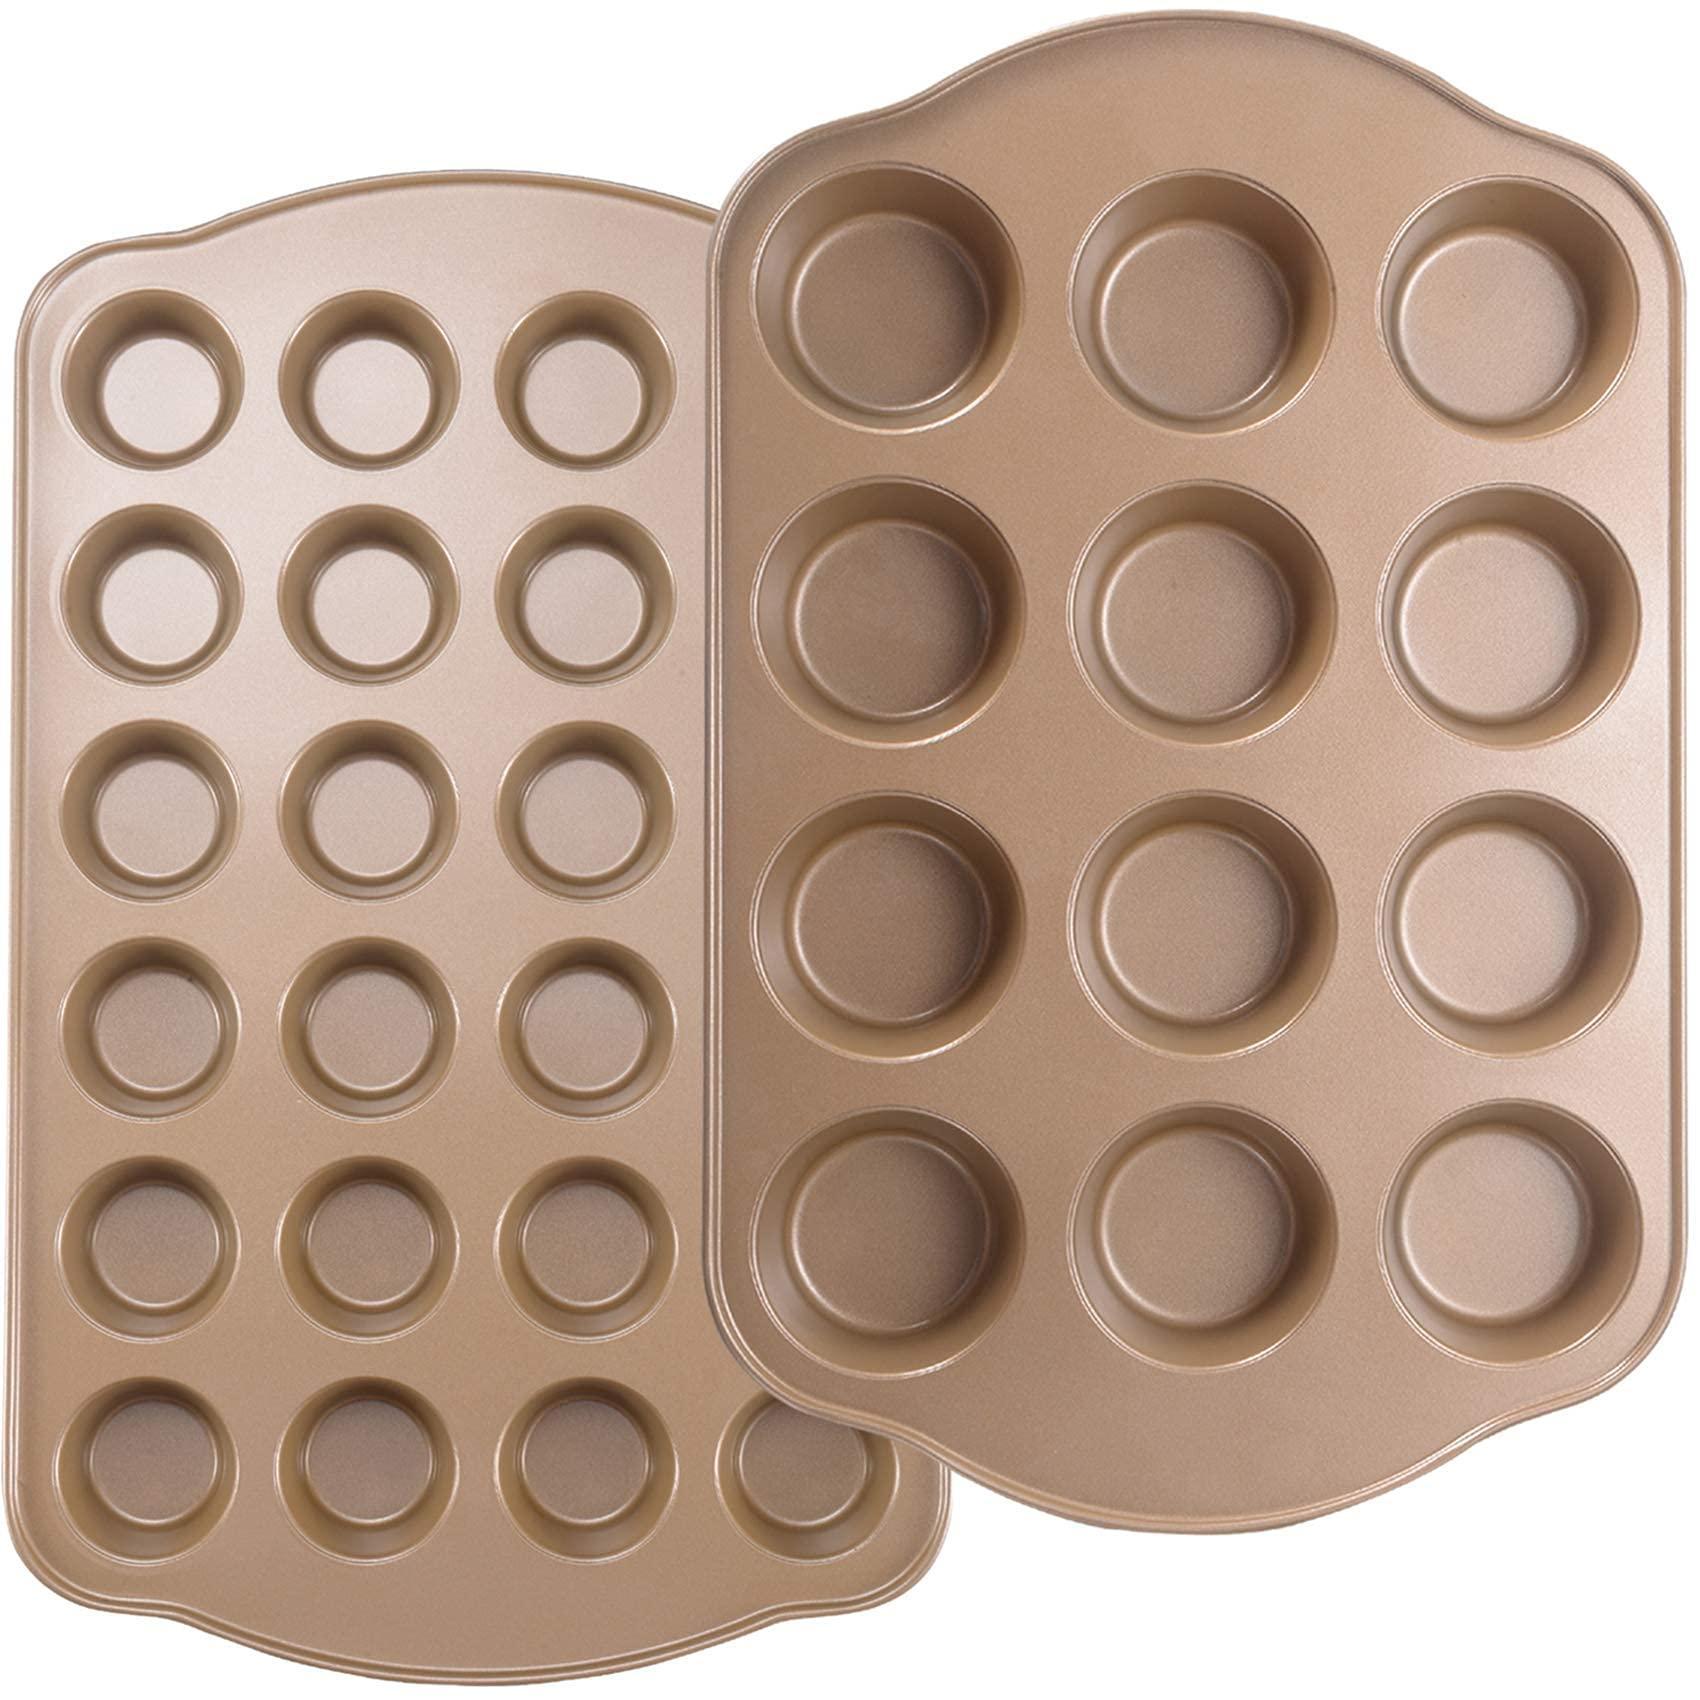 Joho Baking Nonstick Muffin Pan, Mini Cupcake Pan Set, Muffin Tins for Baking, 2 Pack, 12-Cup and 24-Cup, Gold - CookCave